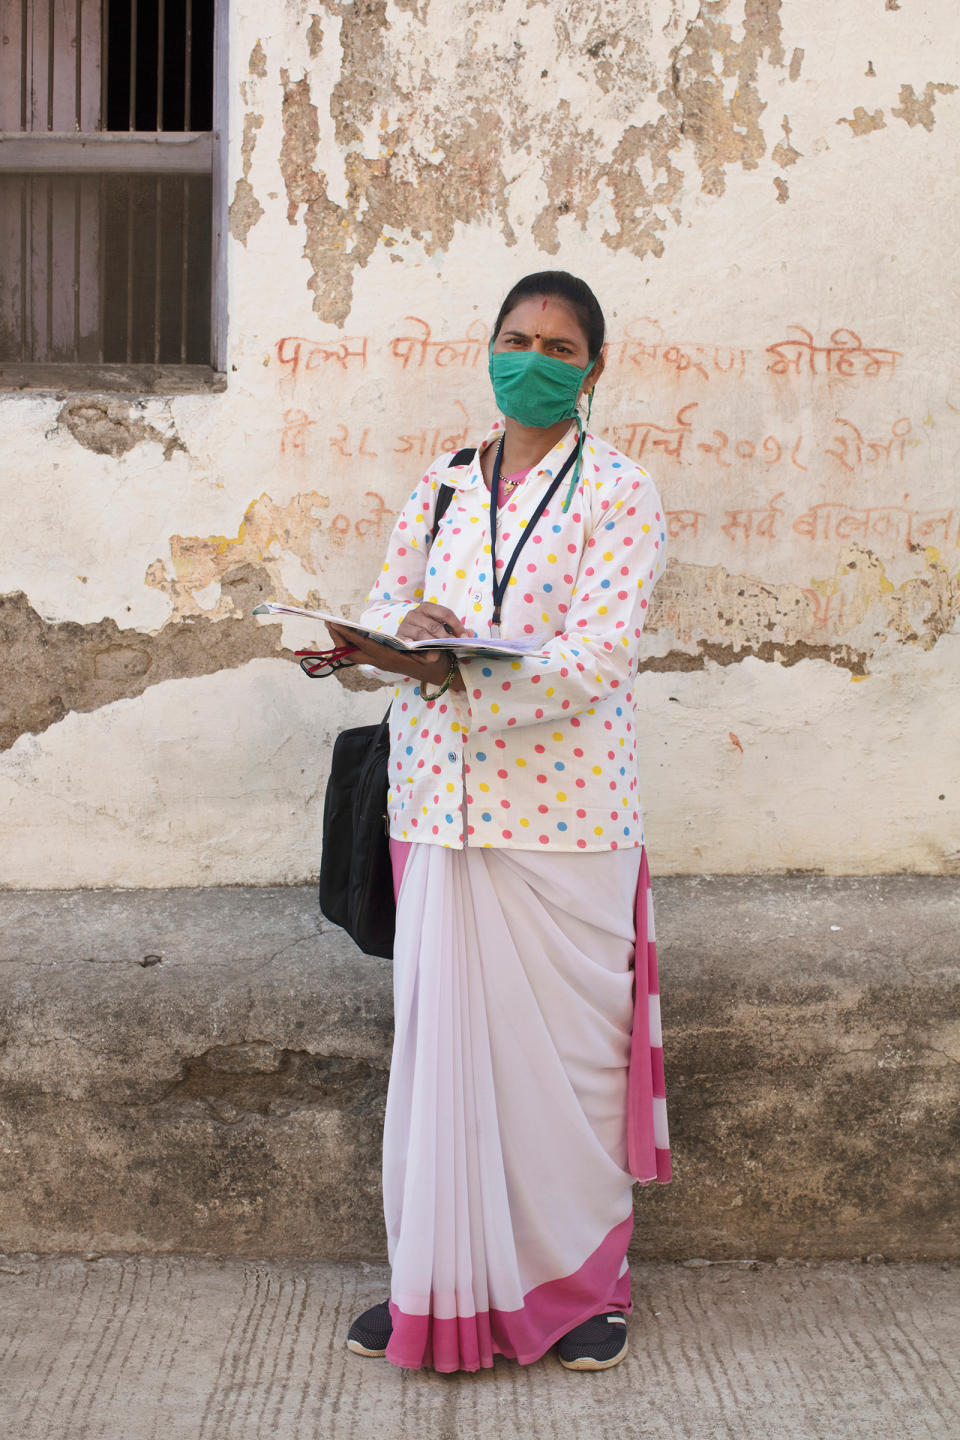 Portrait of Archana Ghugare, a community health worker, in Pavnar, Maharashtra, India, on Dec. 1, 2020. In the background is a message encouraging people to bring their children for the Polio vaccine drive.<span class="copyright">Prarthna Singh for TIME</span>